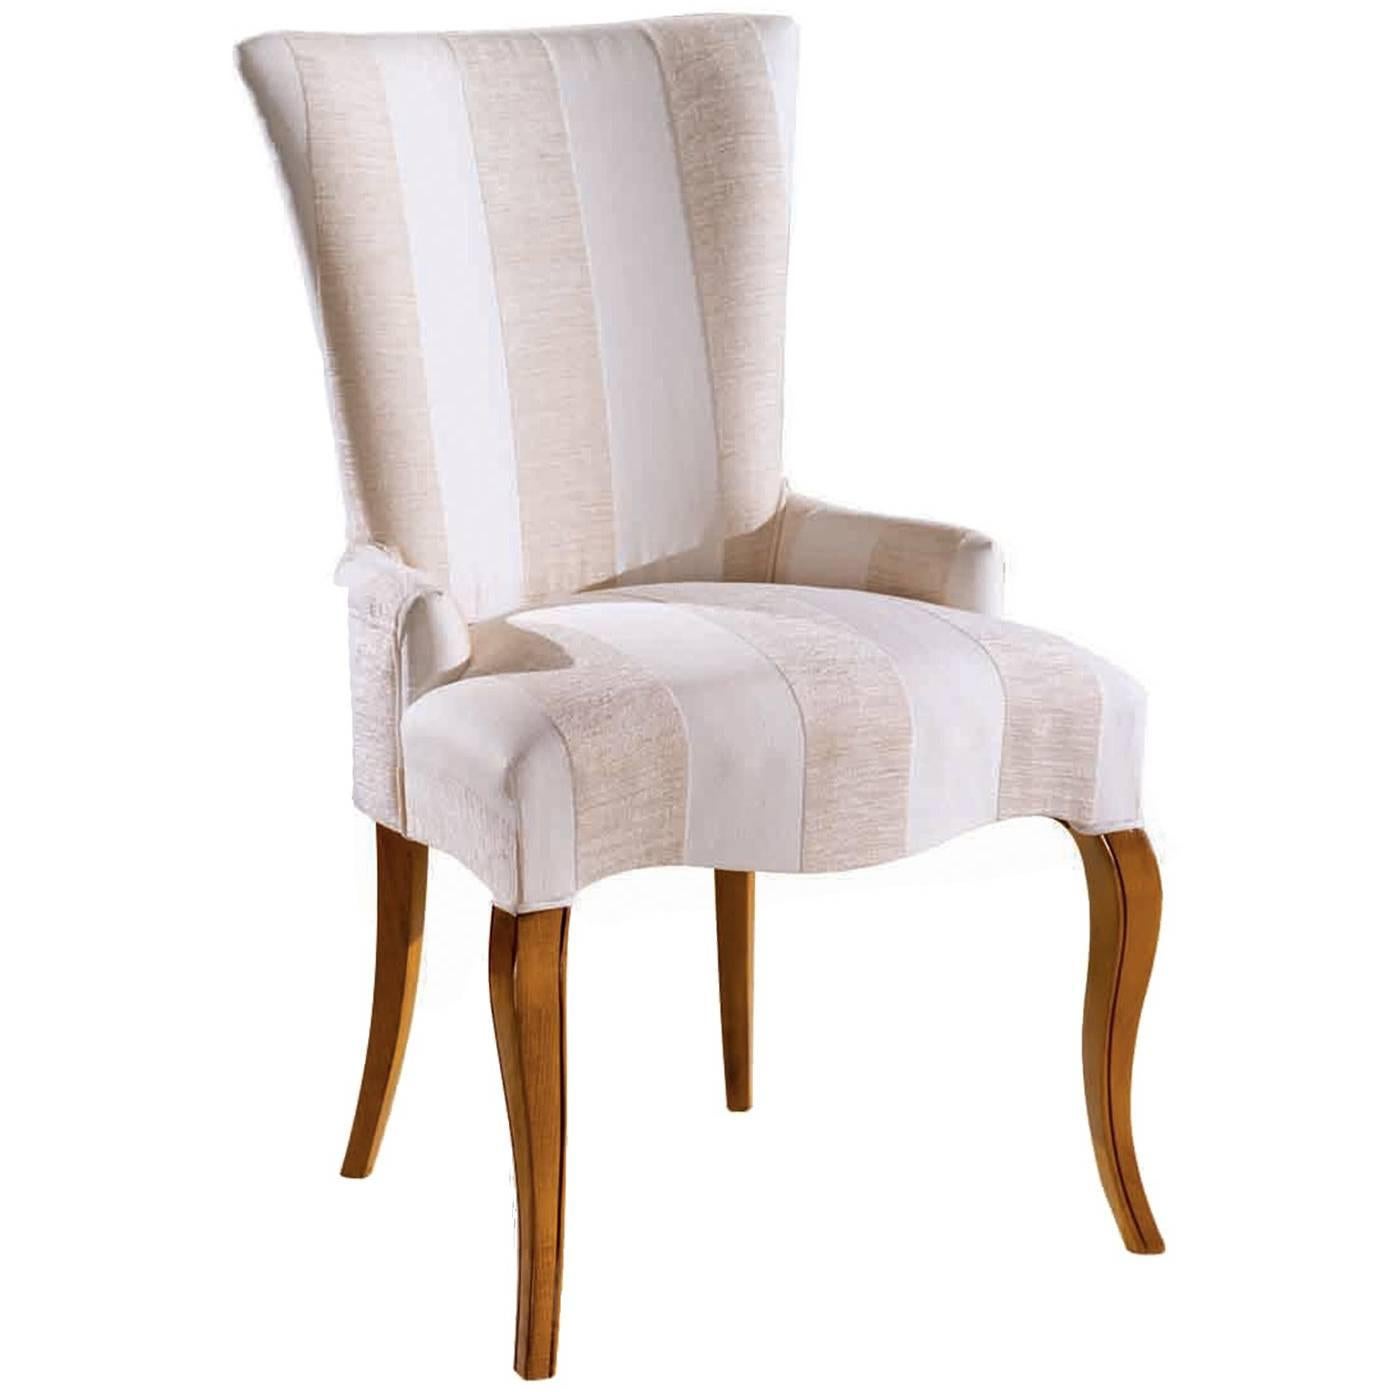 White and Pink Upholstered Armchair